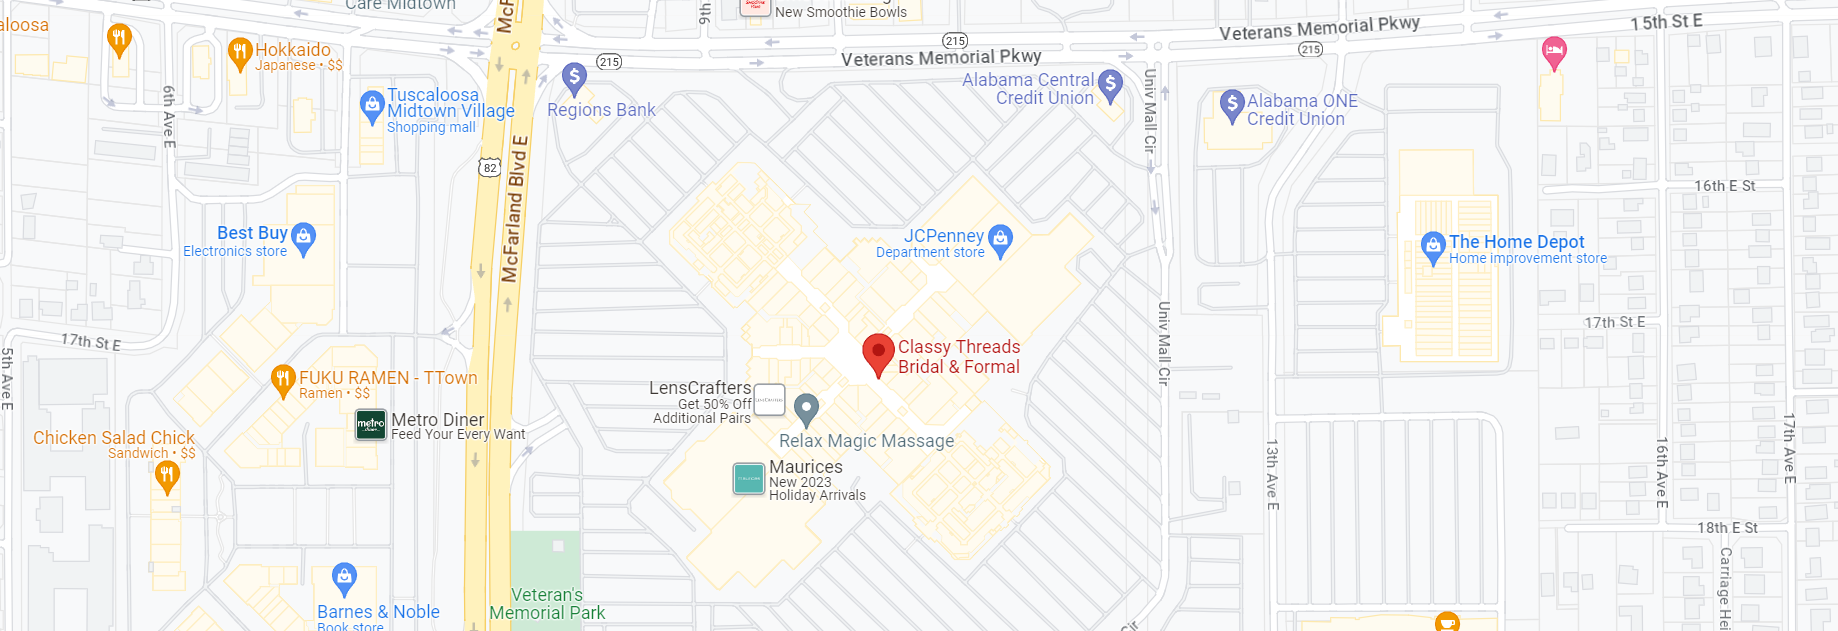 Classy Threads Bridal and Formal Tuscaloosa Location Map Desktop